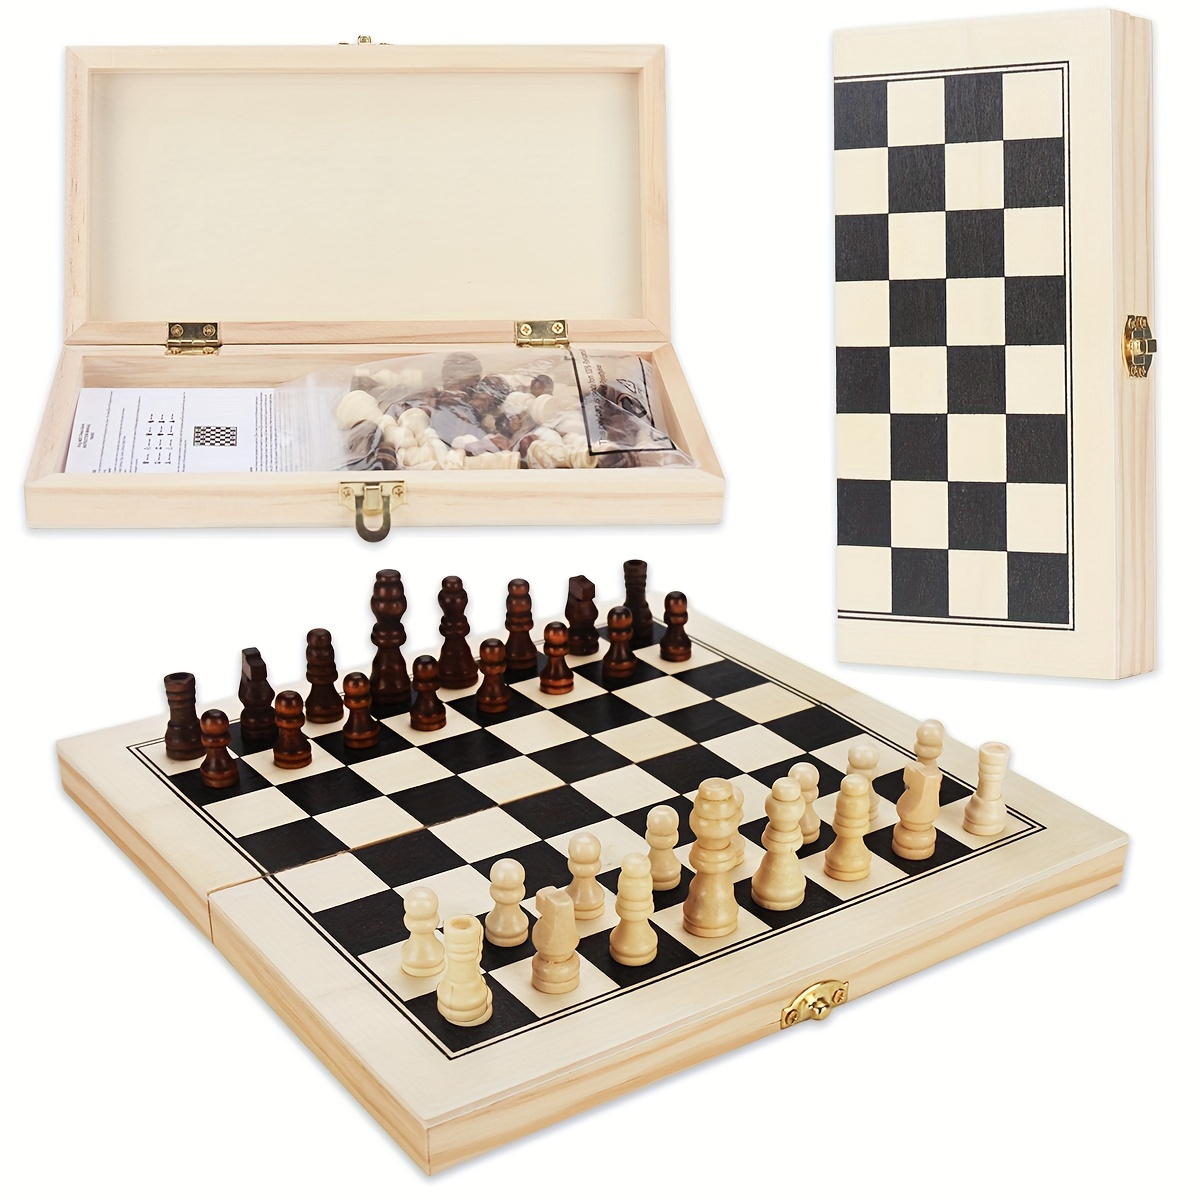  15 Metal Chess Sets for Adults Kids with Zinc Alloy +